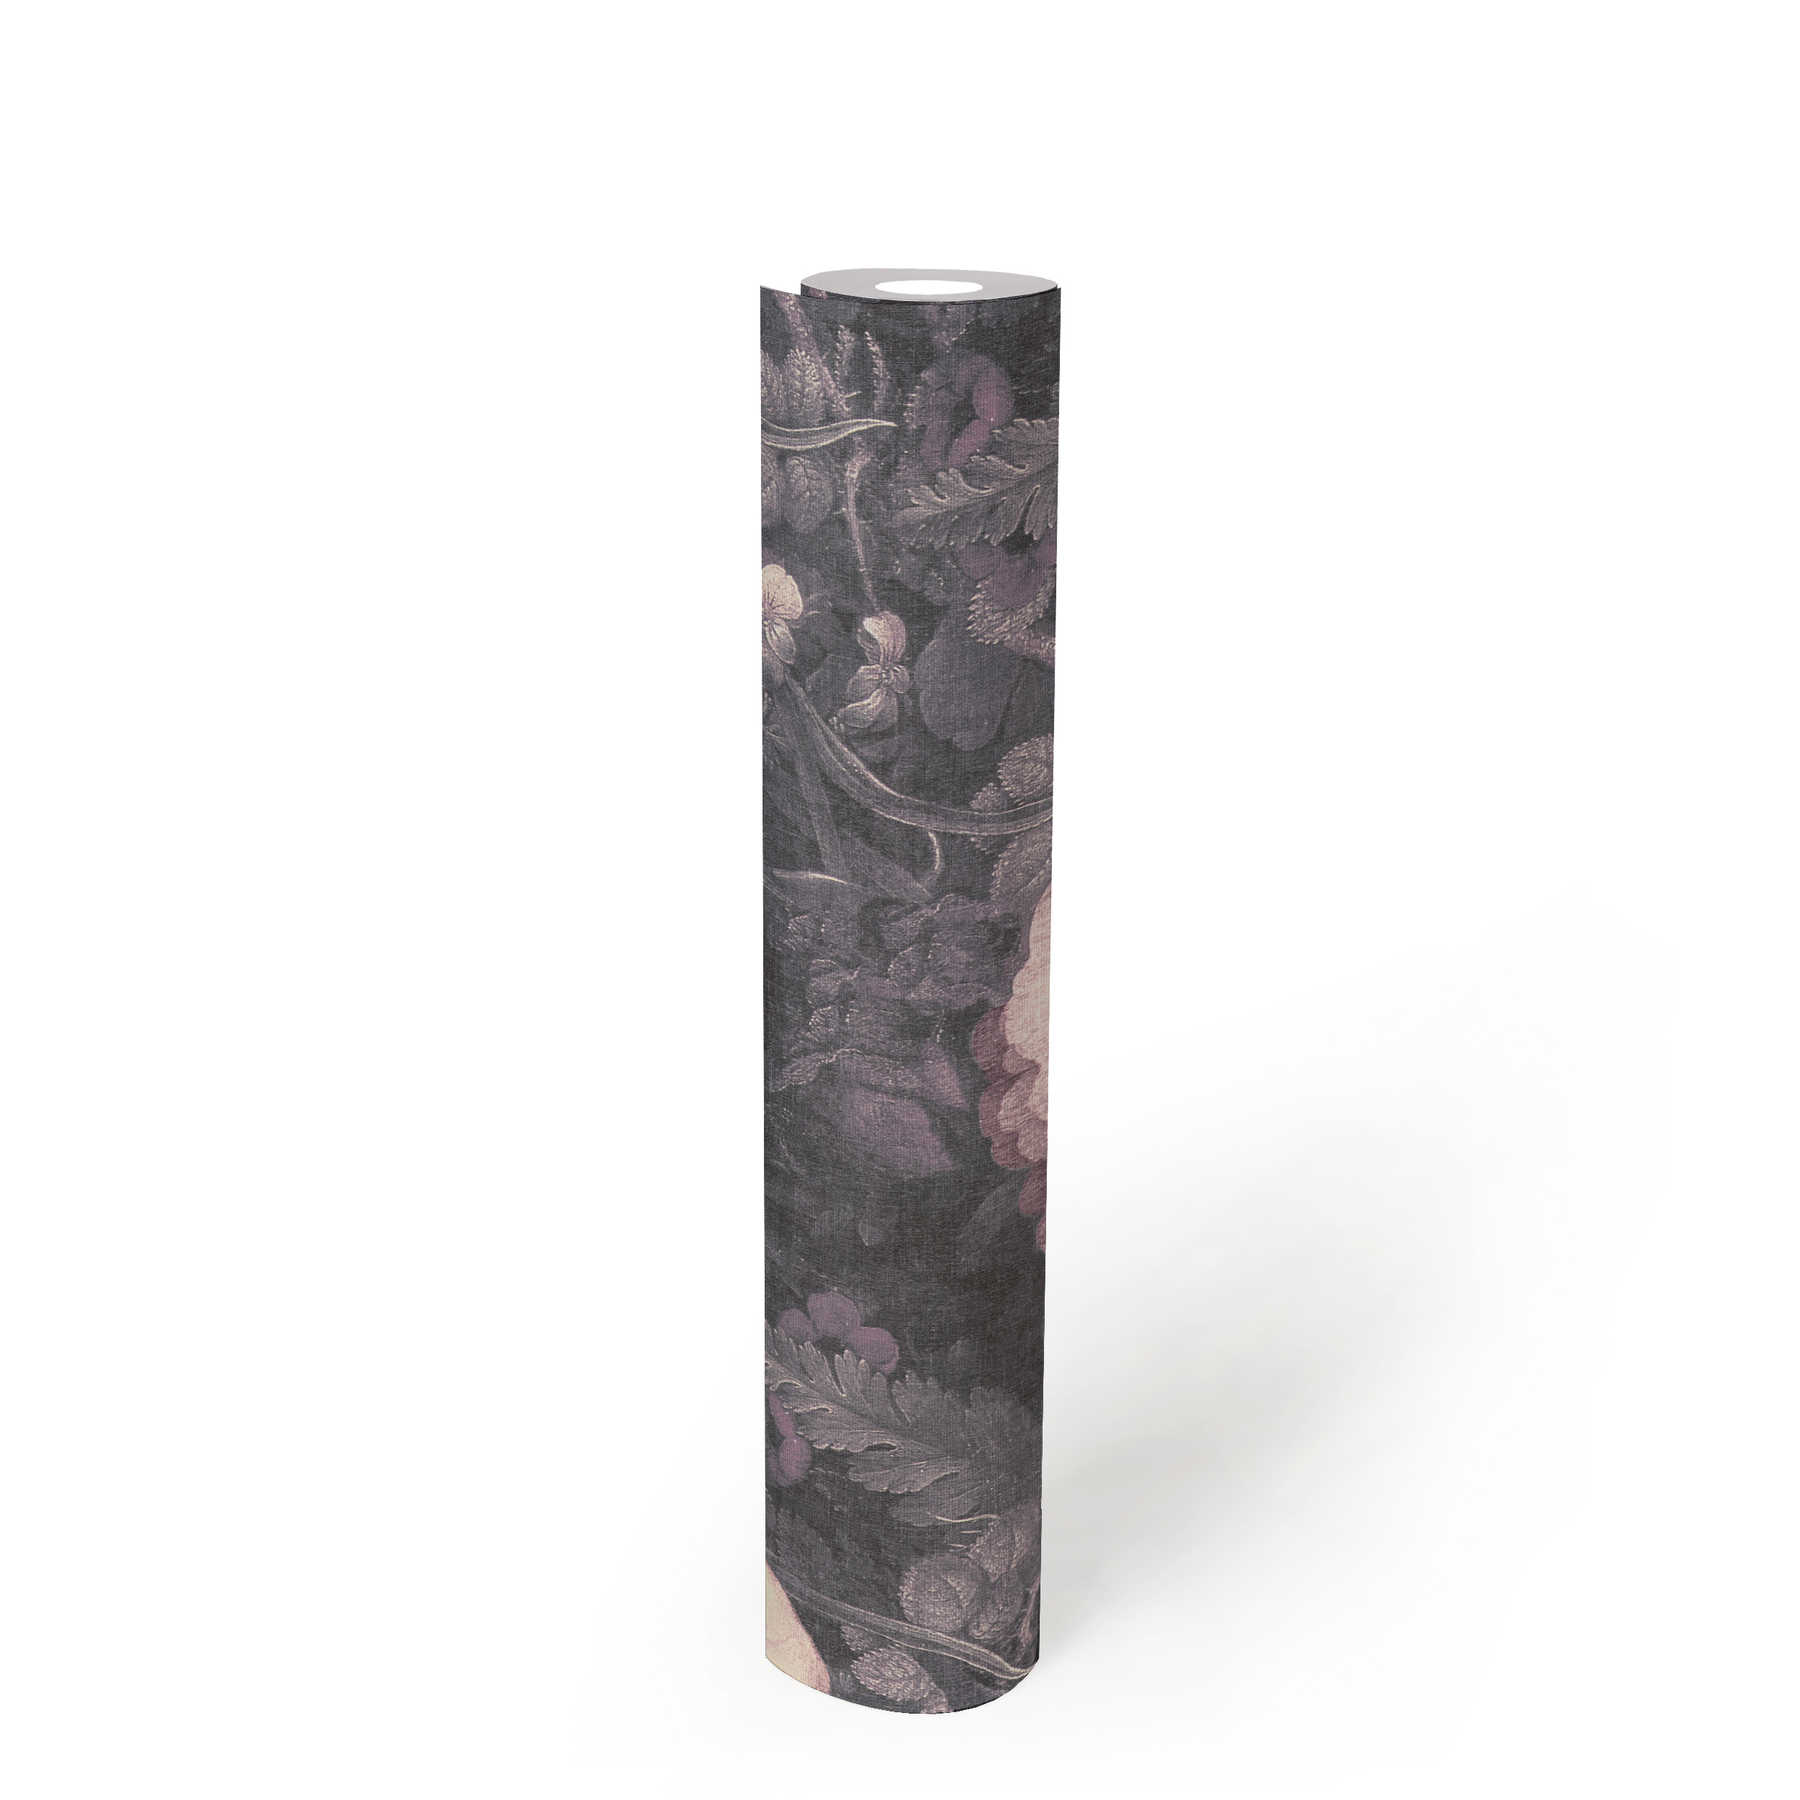             Painting style floral wallpaper, canvas look - grey, pink, black
        